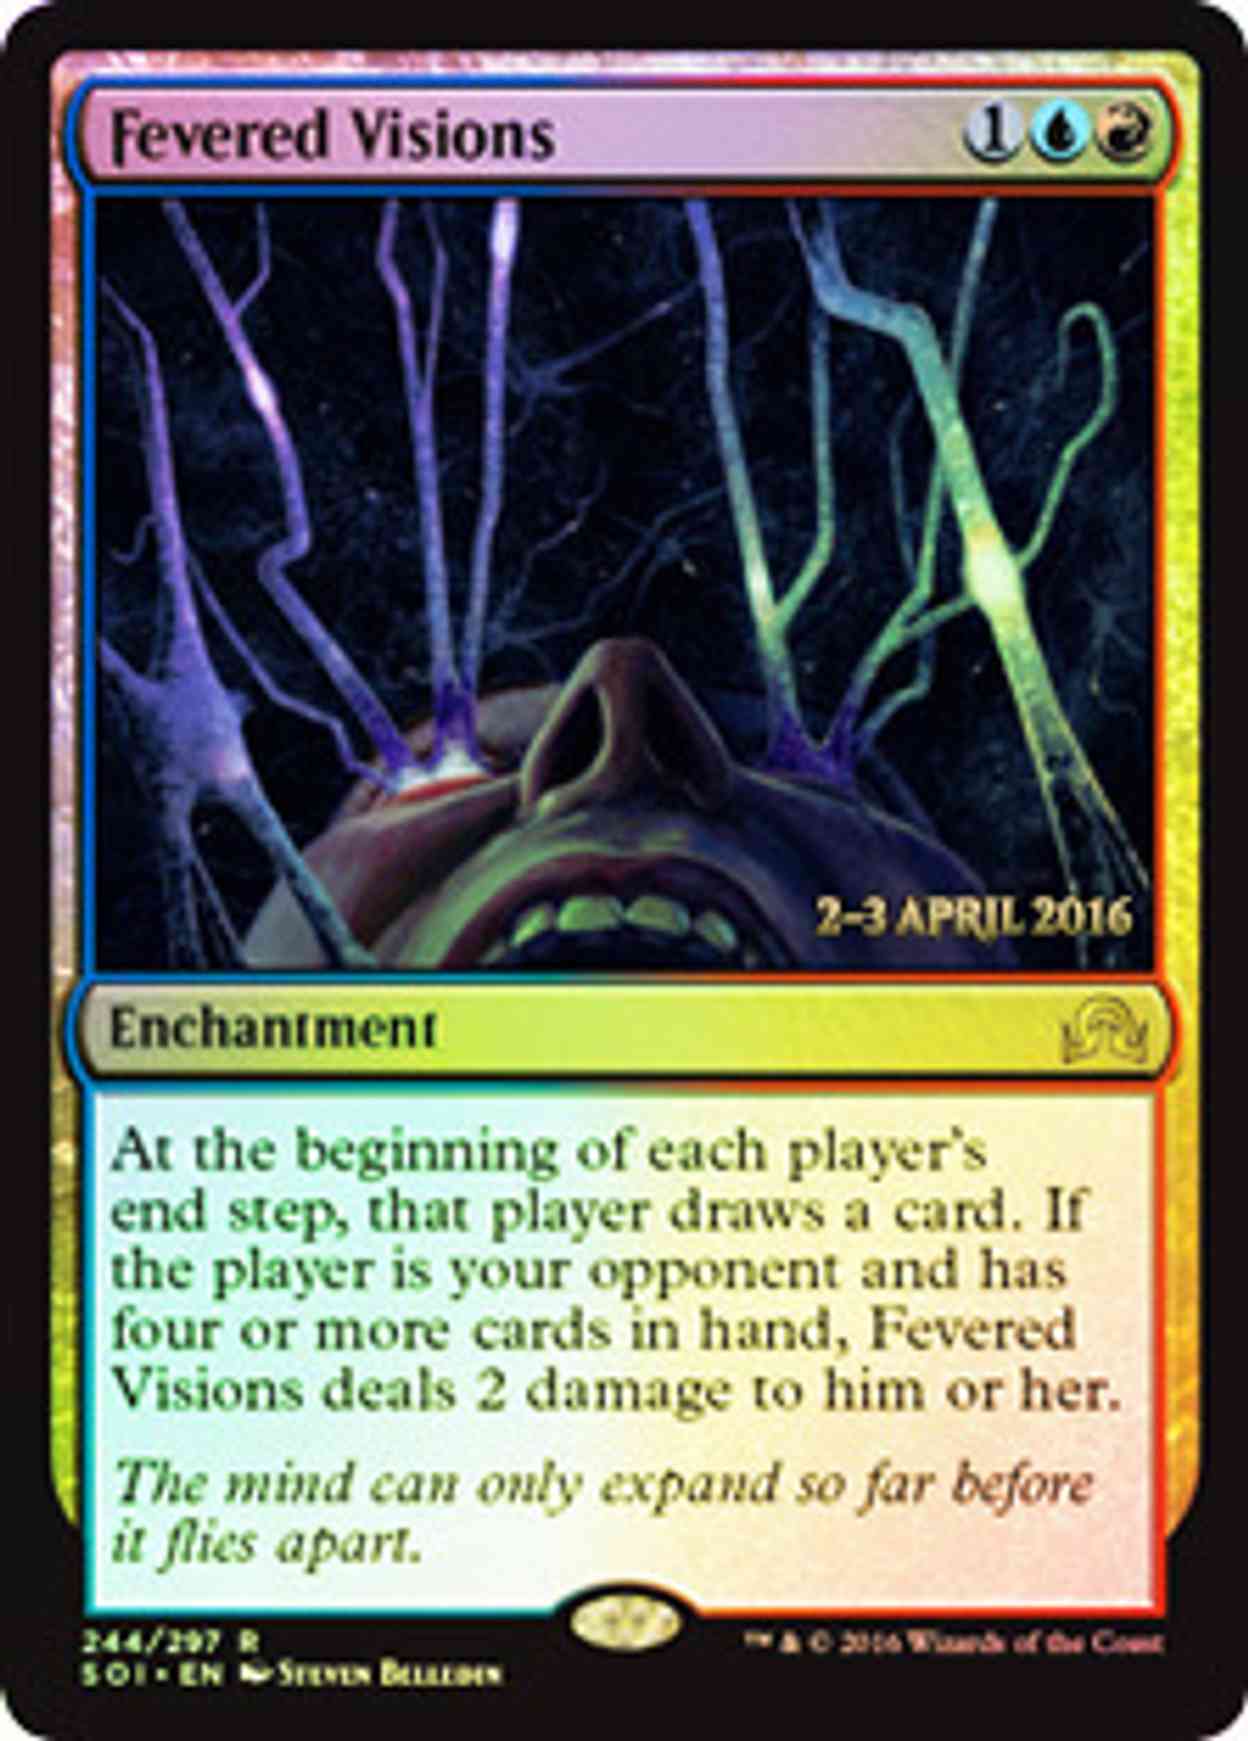 Fevered Visions magic card front